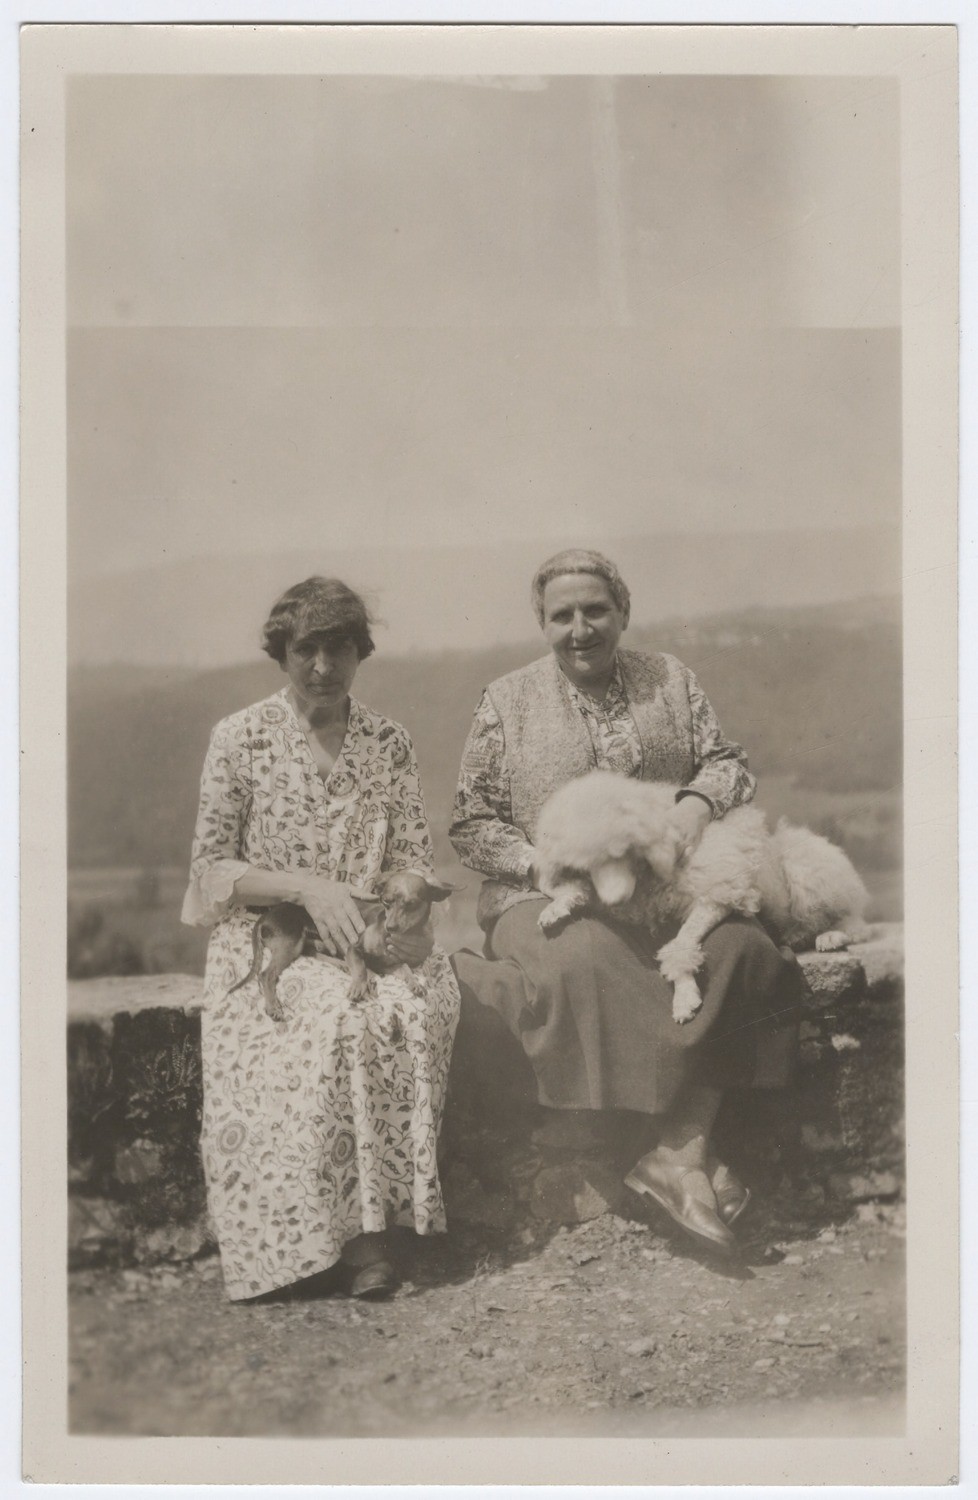 Alice B. Toklas and Gertrude Stein with Pepe and Basket, [1932]